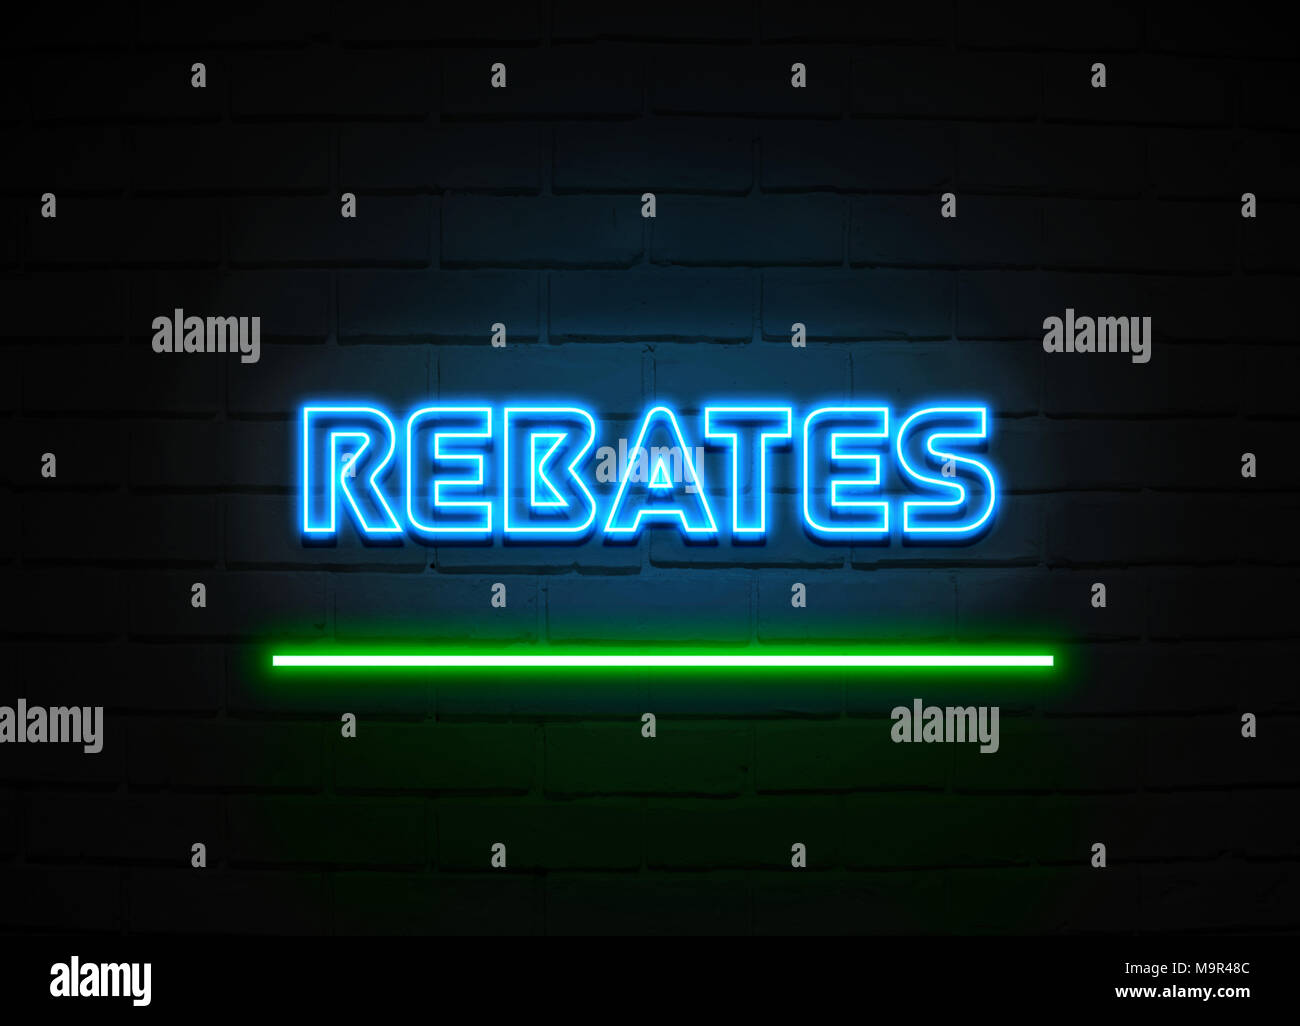 rebates-neon-sign-glowing-neon-sign-on-brickwall-wall-3d-rendered